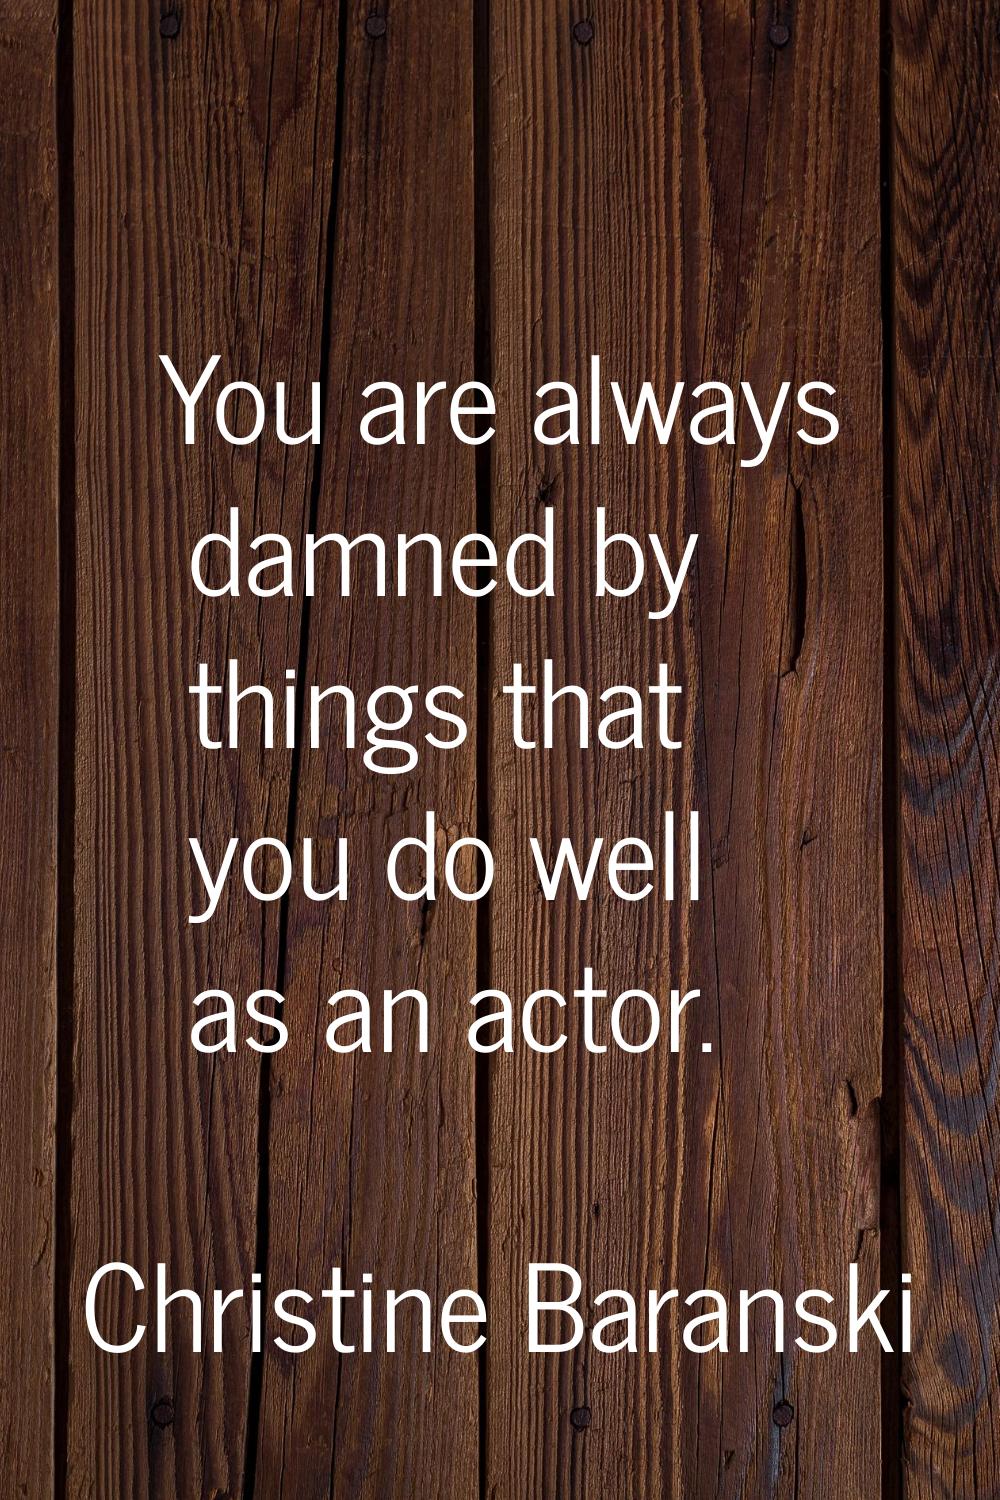 You are always damned by things that you do well as an actor.